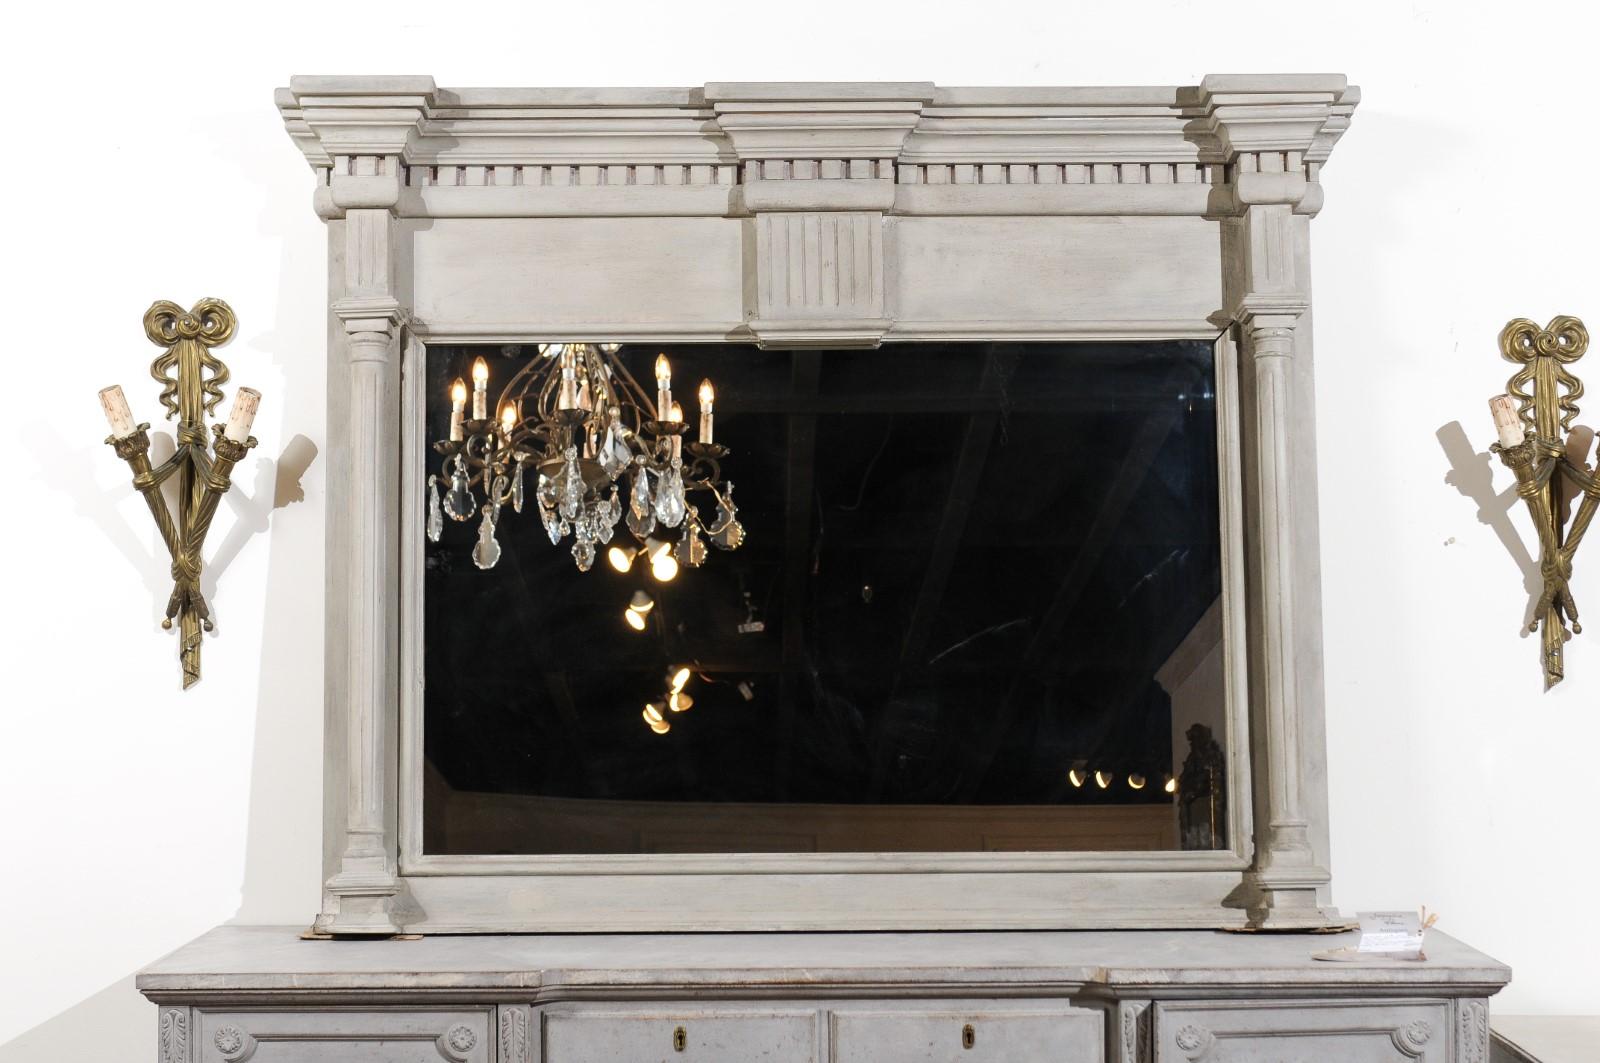 A French neoclassical style architectural element from the 19th century, made into a trumeau mirror. Born in France during the 19th century, this neoclassical style architectural element presents a linear silhouette beautifully adorned with